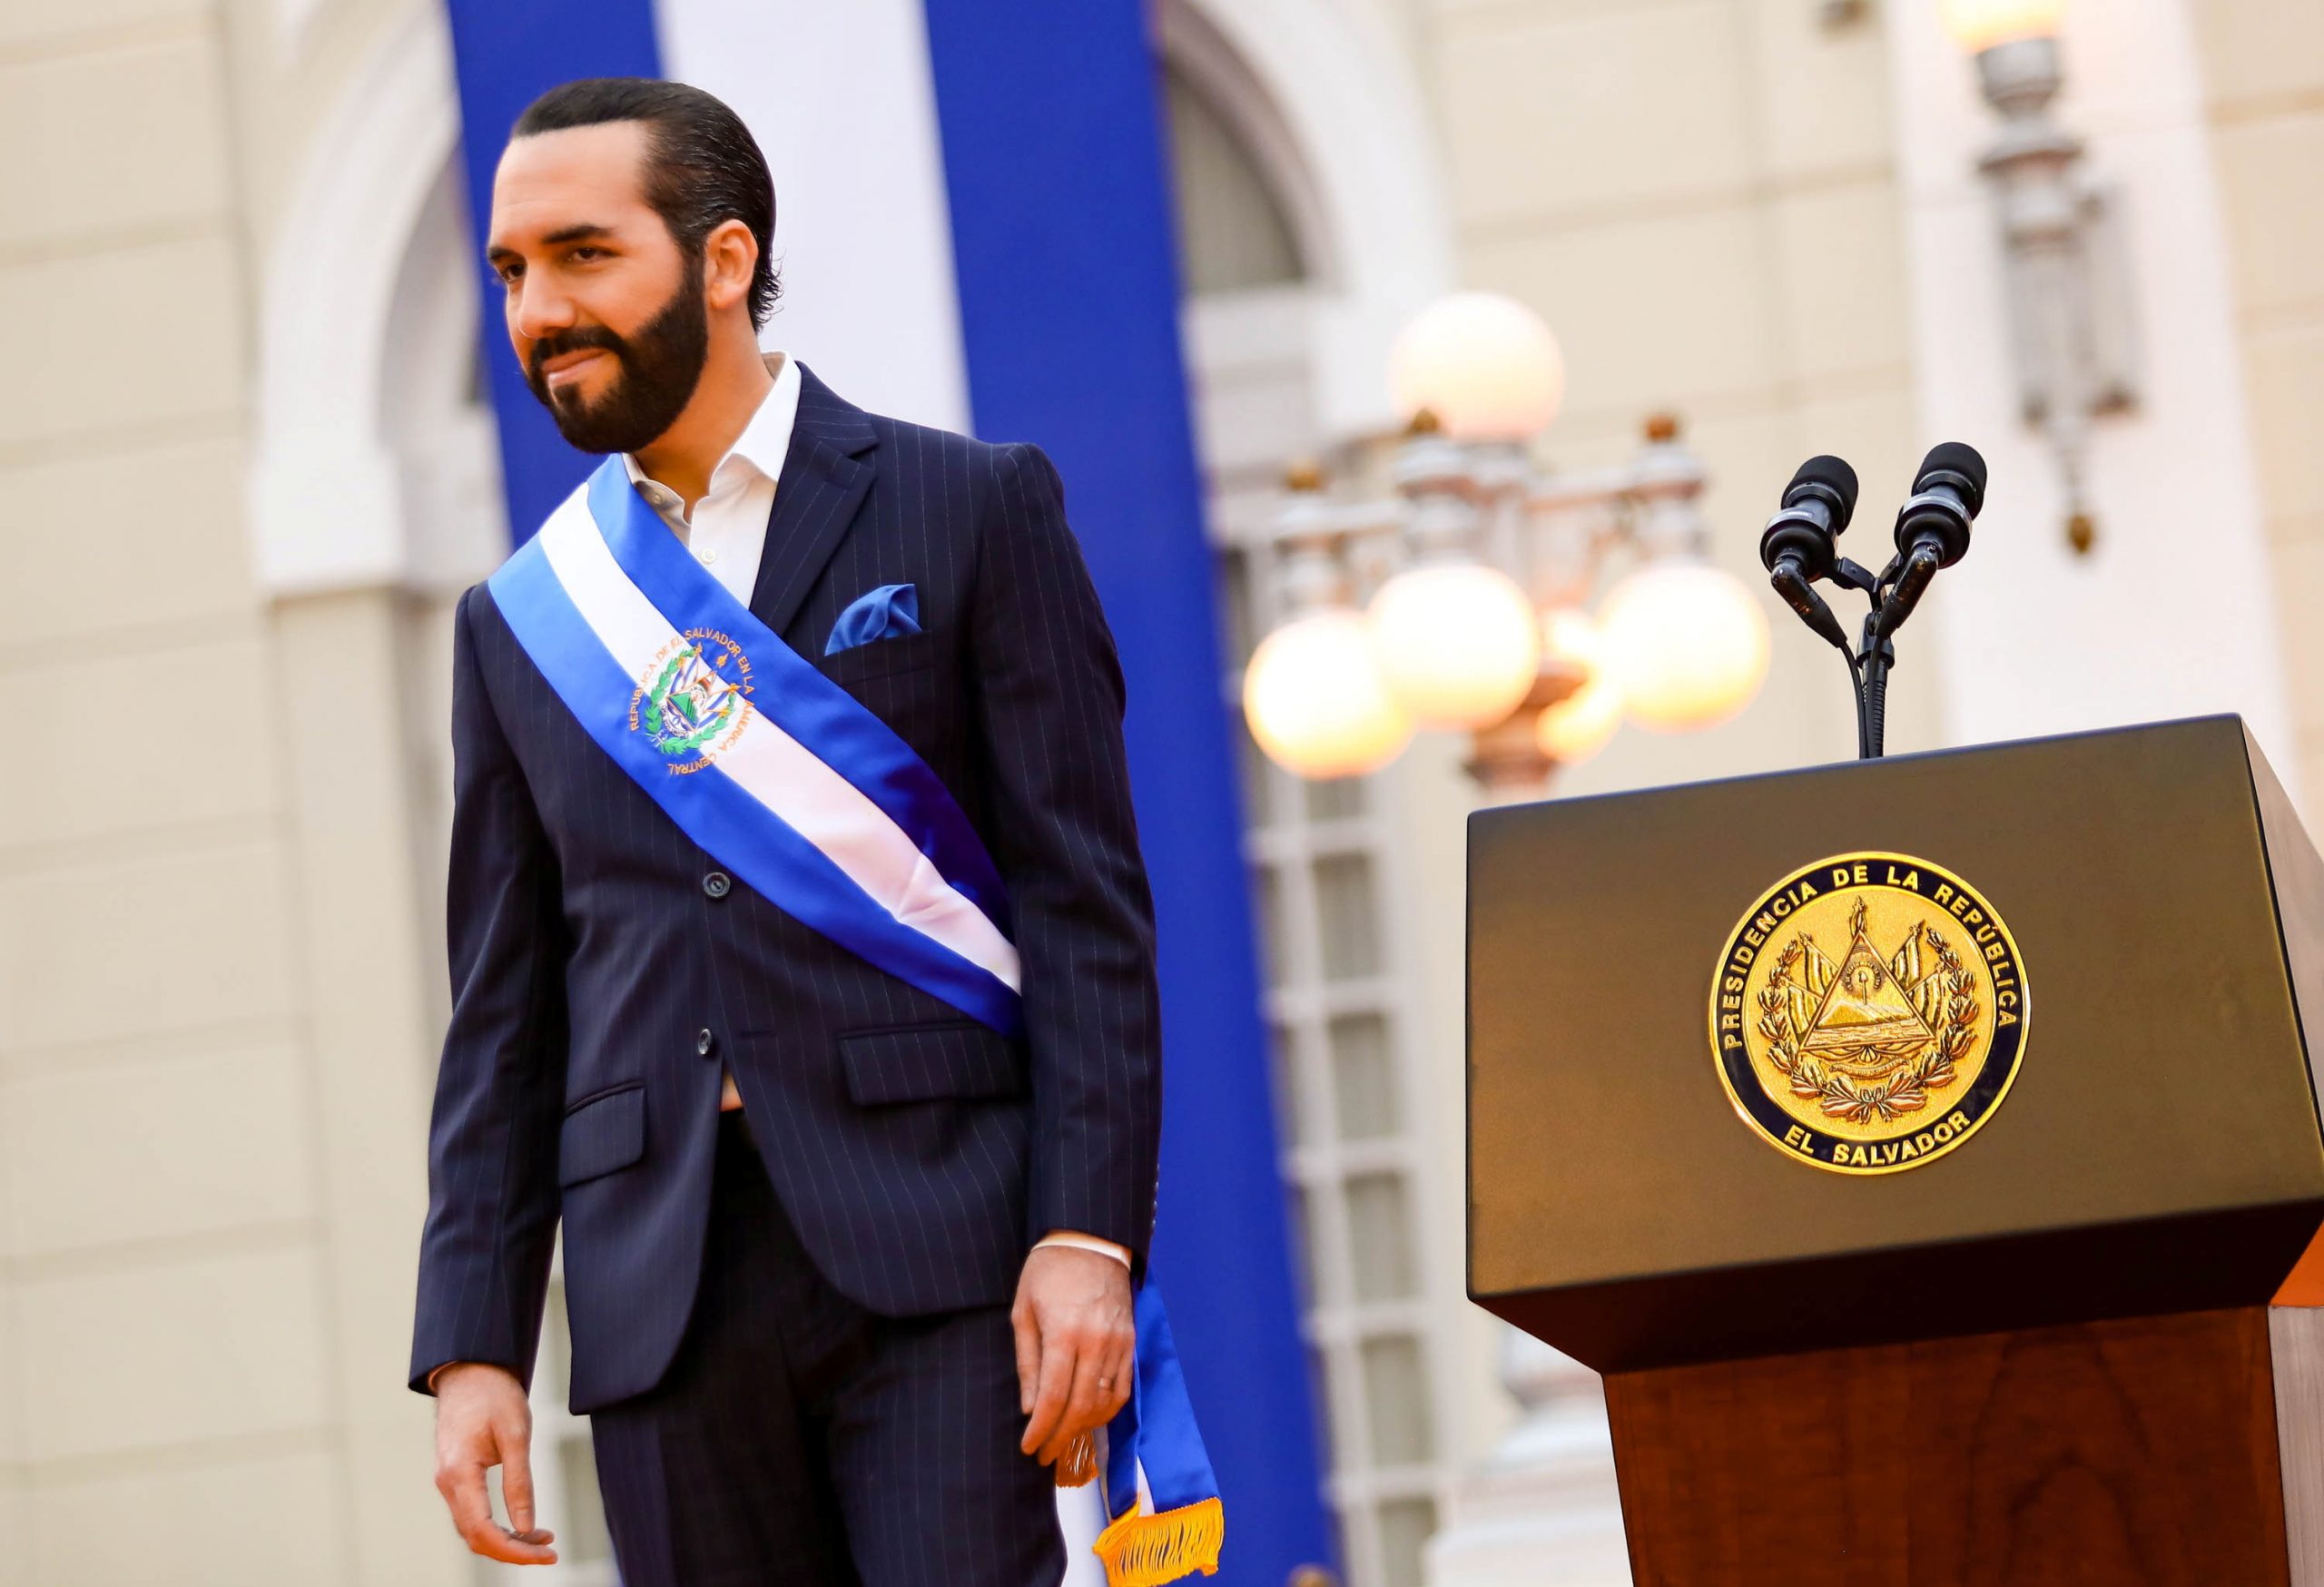 El Salvador's President Nayib Bukele takes part in a ceremony to celebrate the independency bicentennial in San Salvador